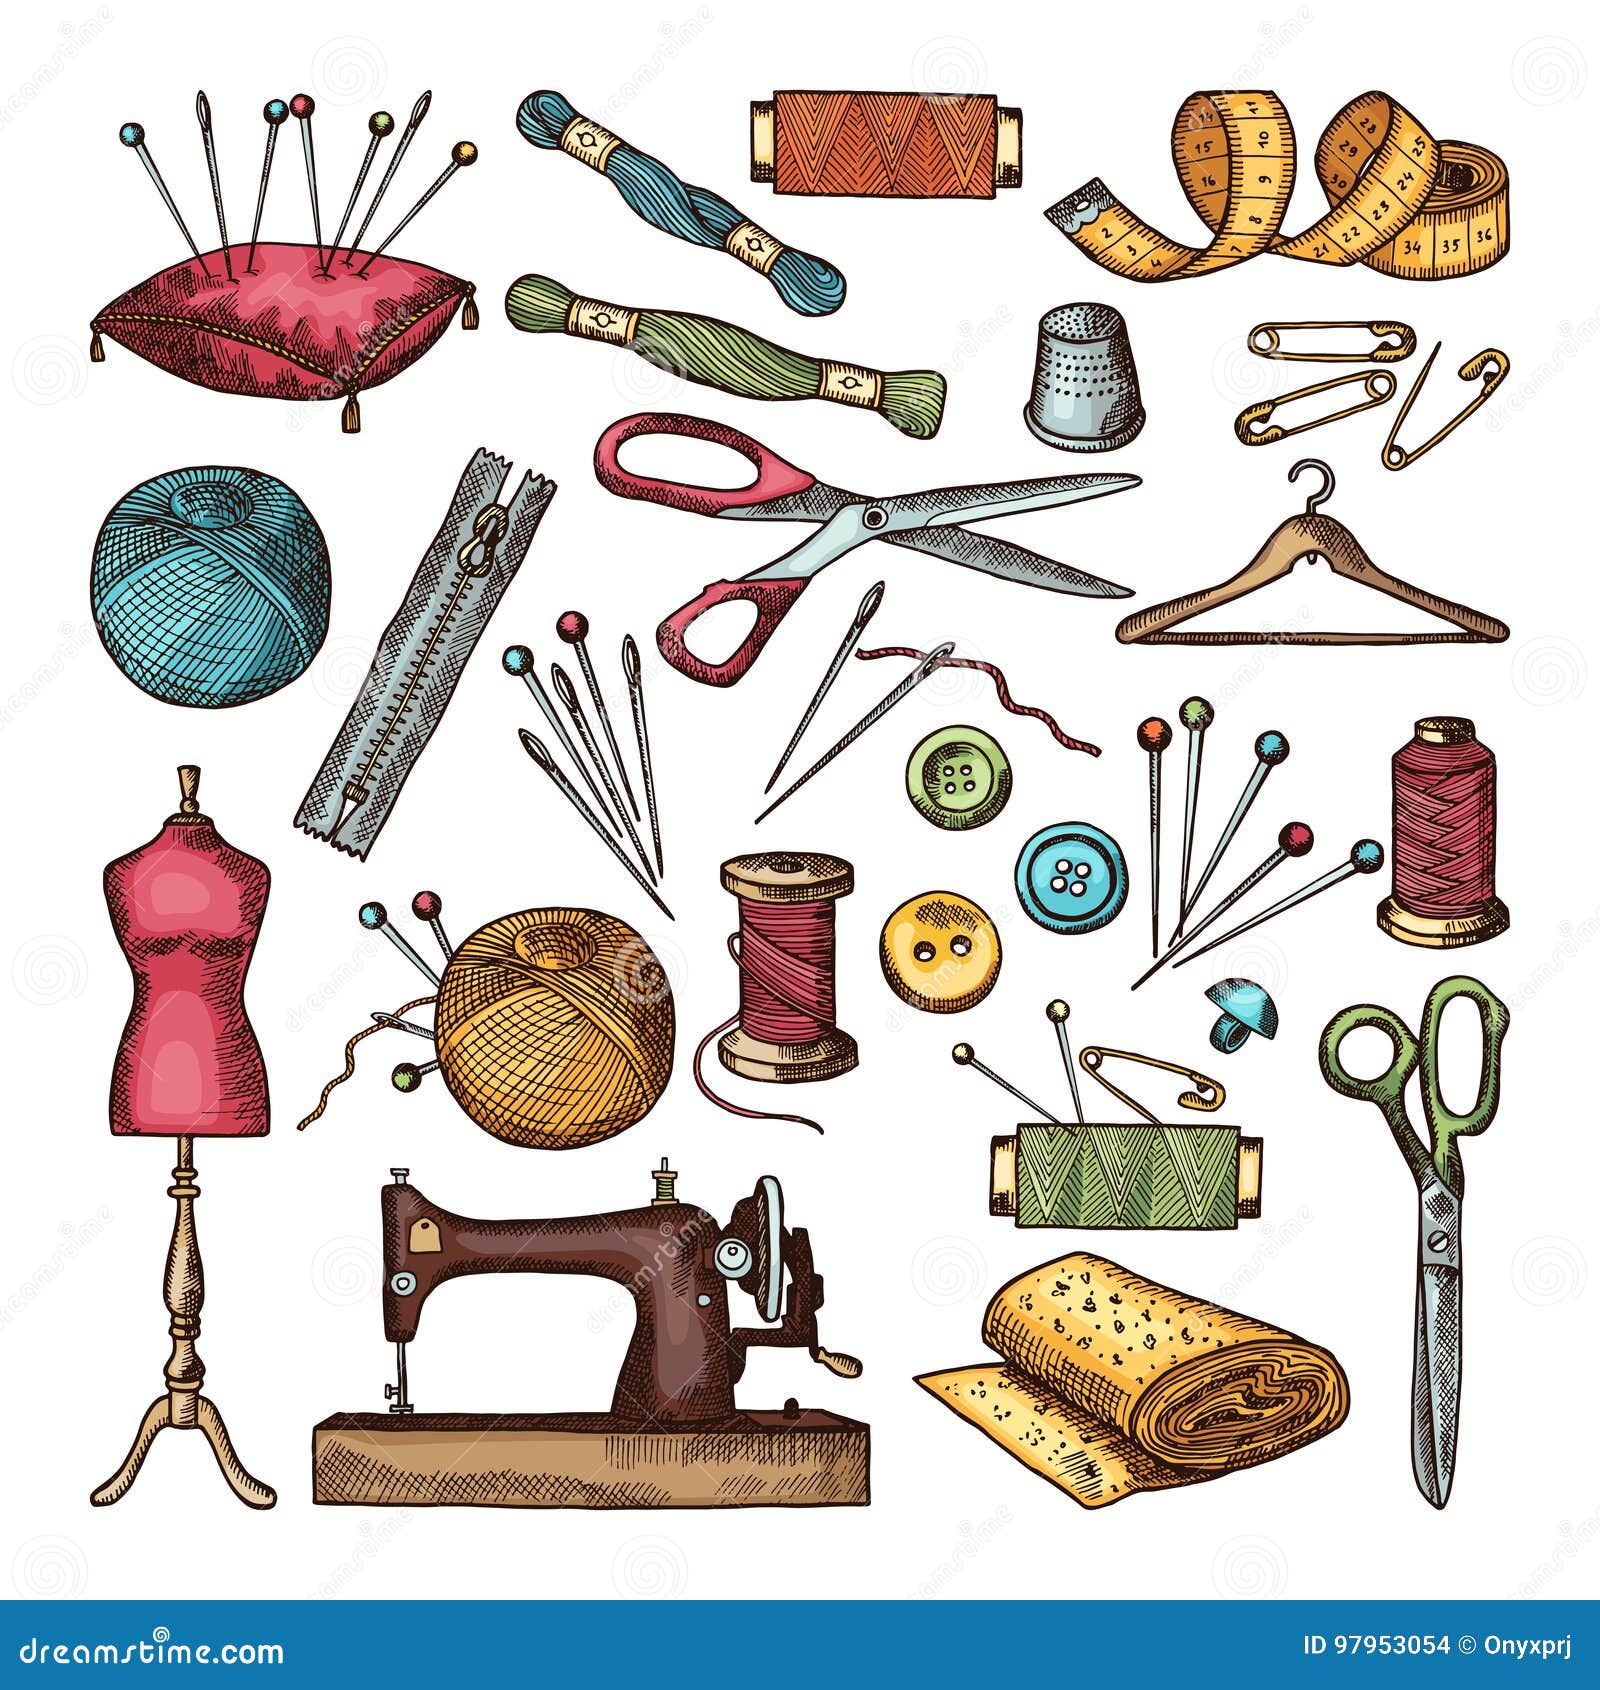 Colored Pictures of Different Tools for Needlework or Sewing